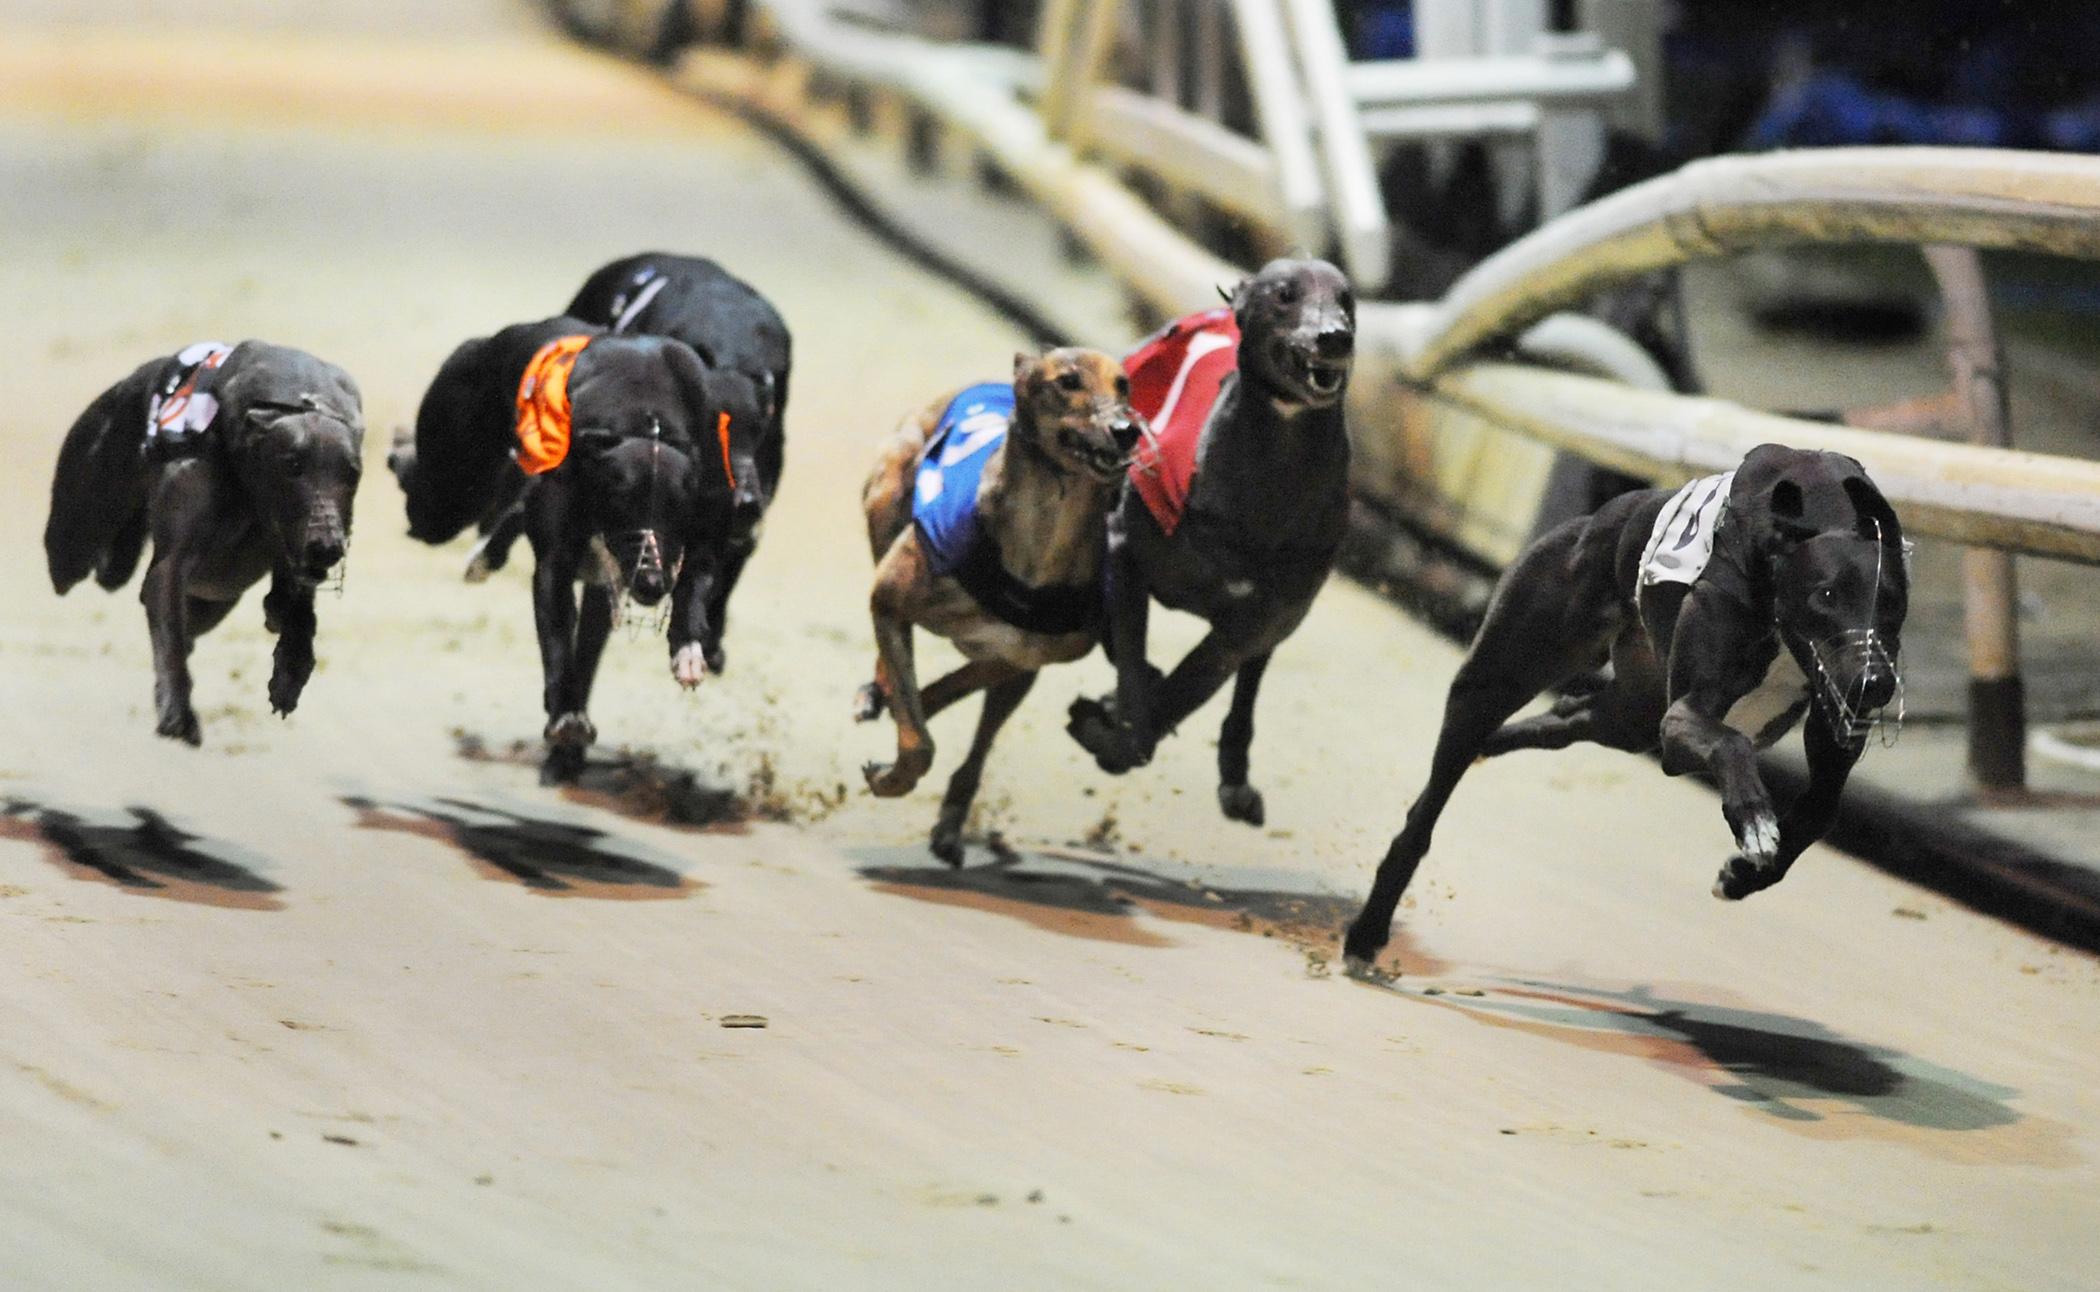 ESSEX VASE REVISITED IN CORONATION CUP - Greyhound Star | News from the ...